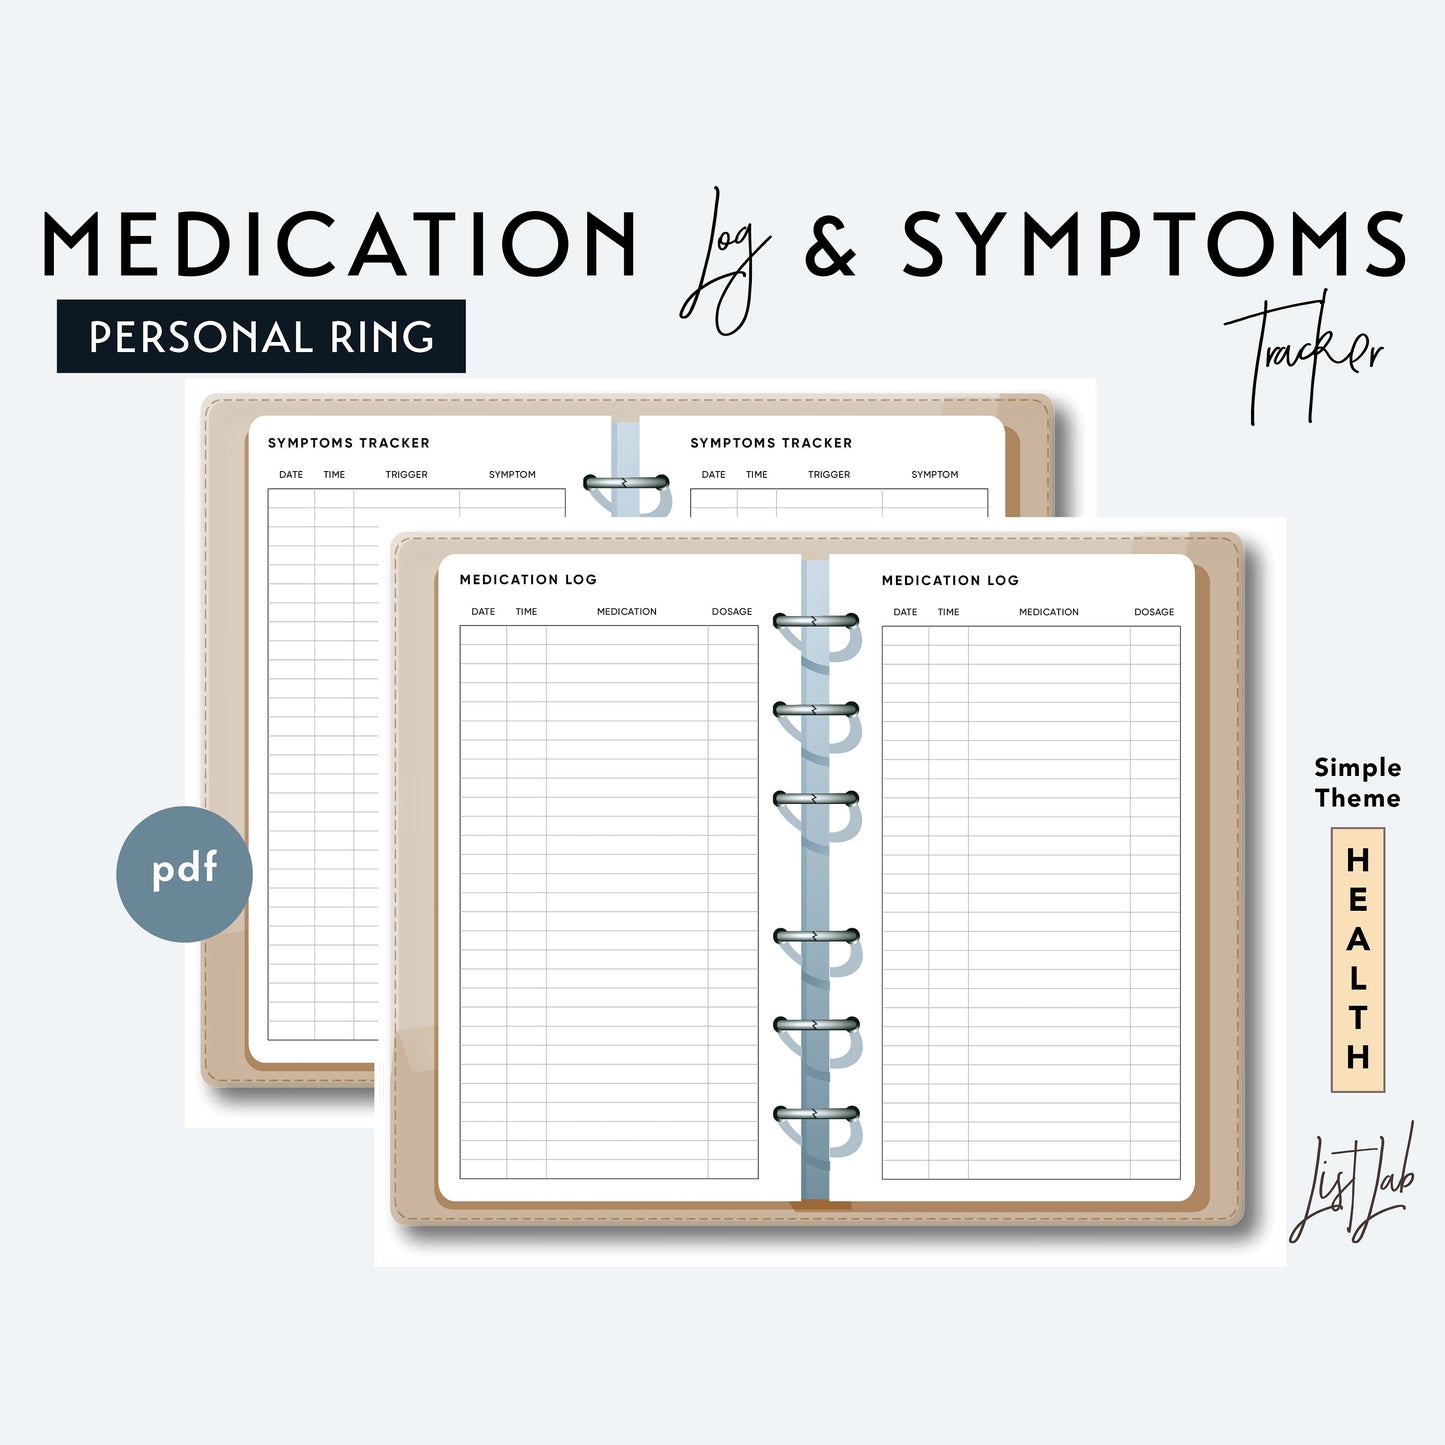 Personal Ring MEDICATION Log and SYMPTOMS Trackers Printable Insert Set